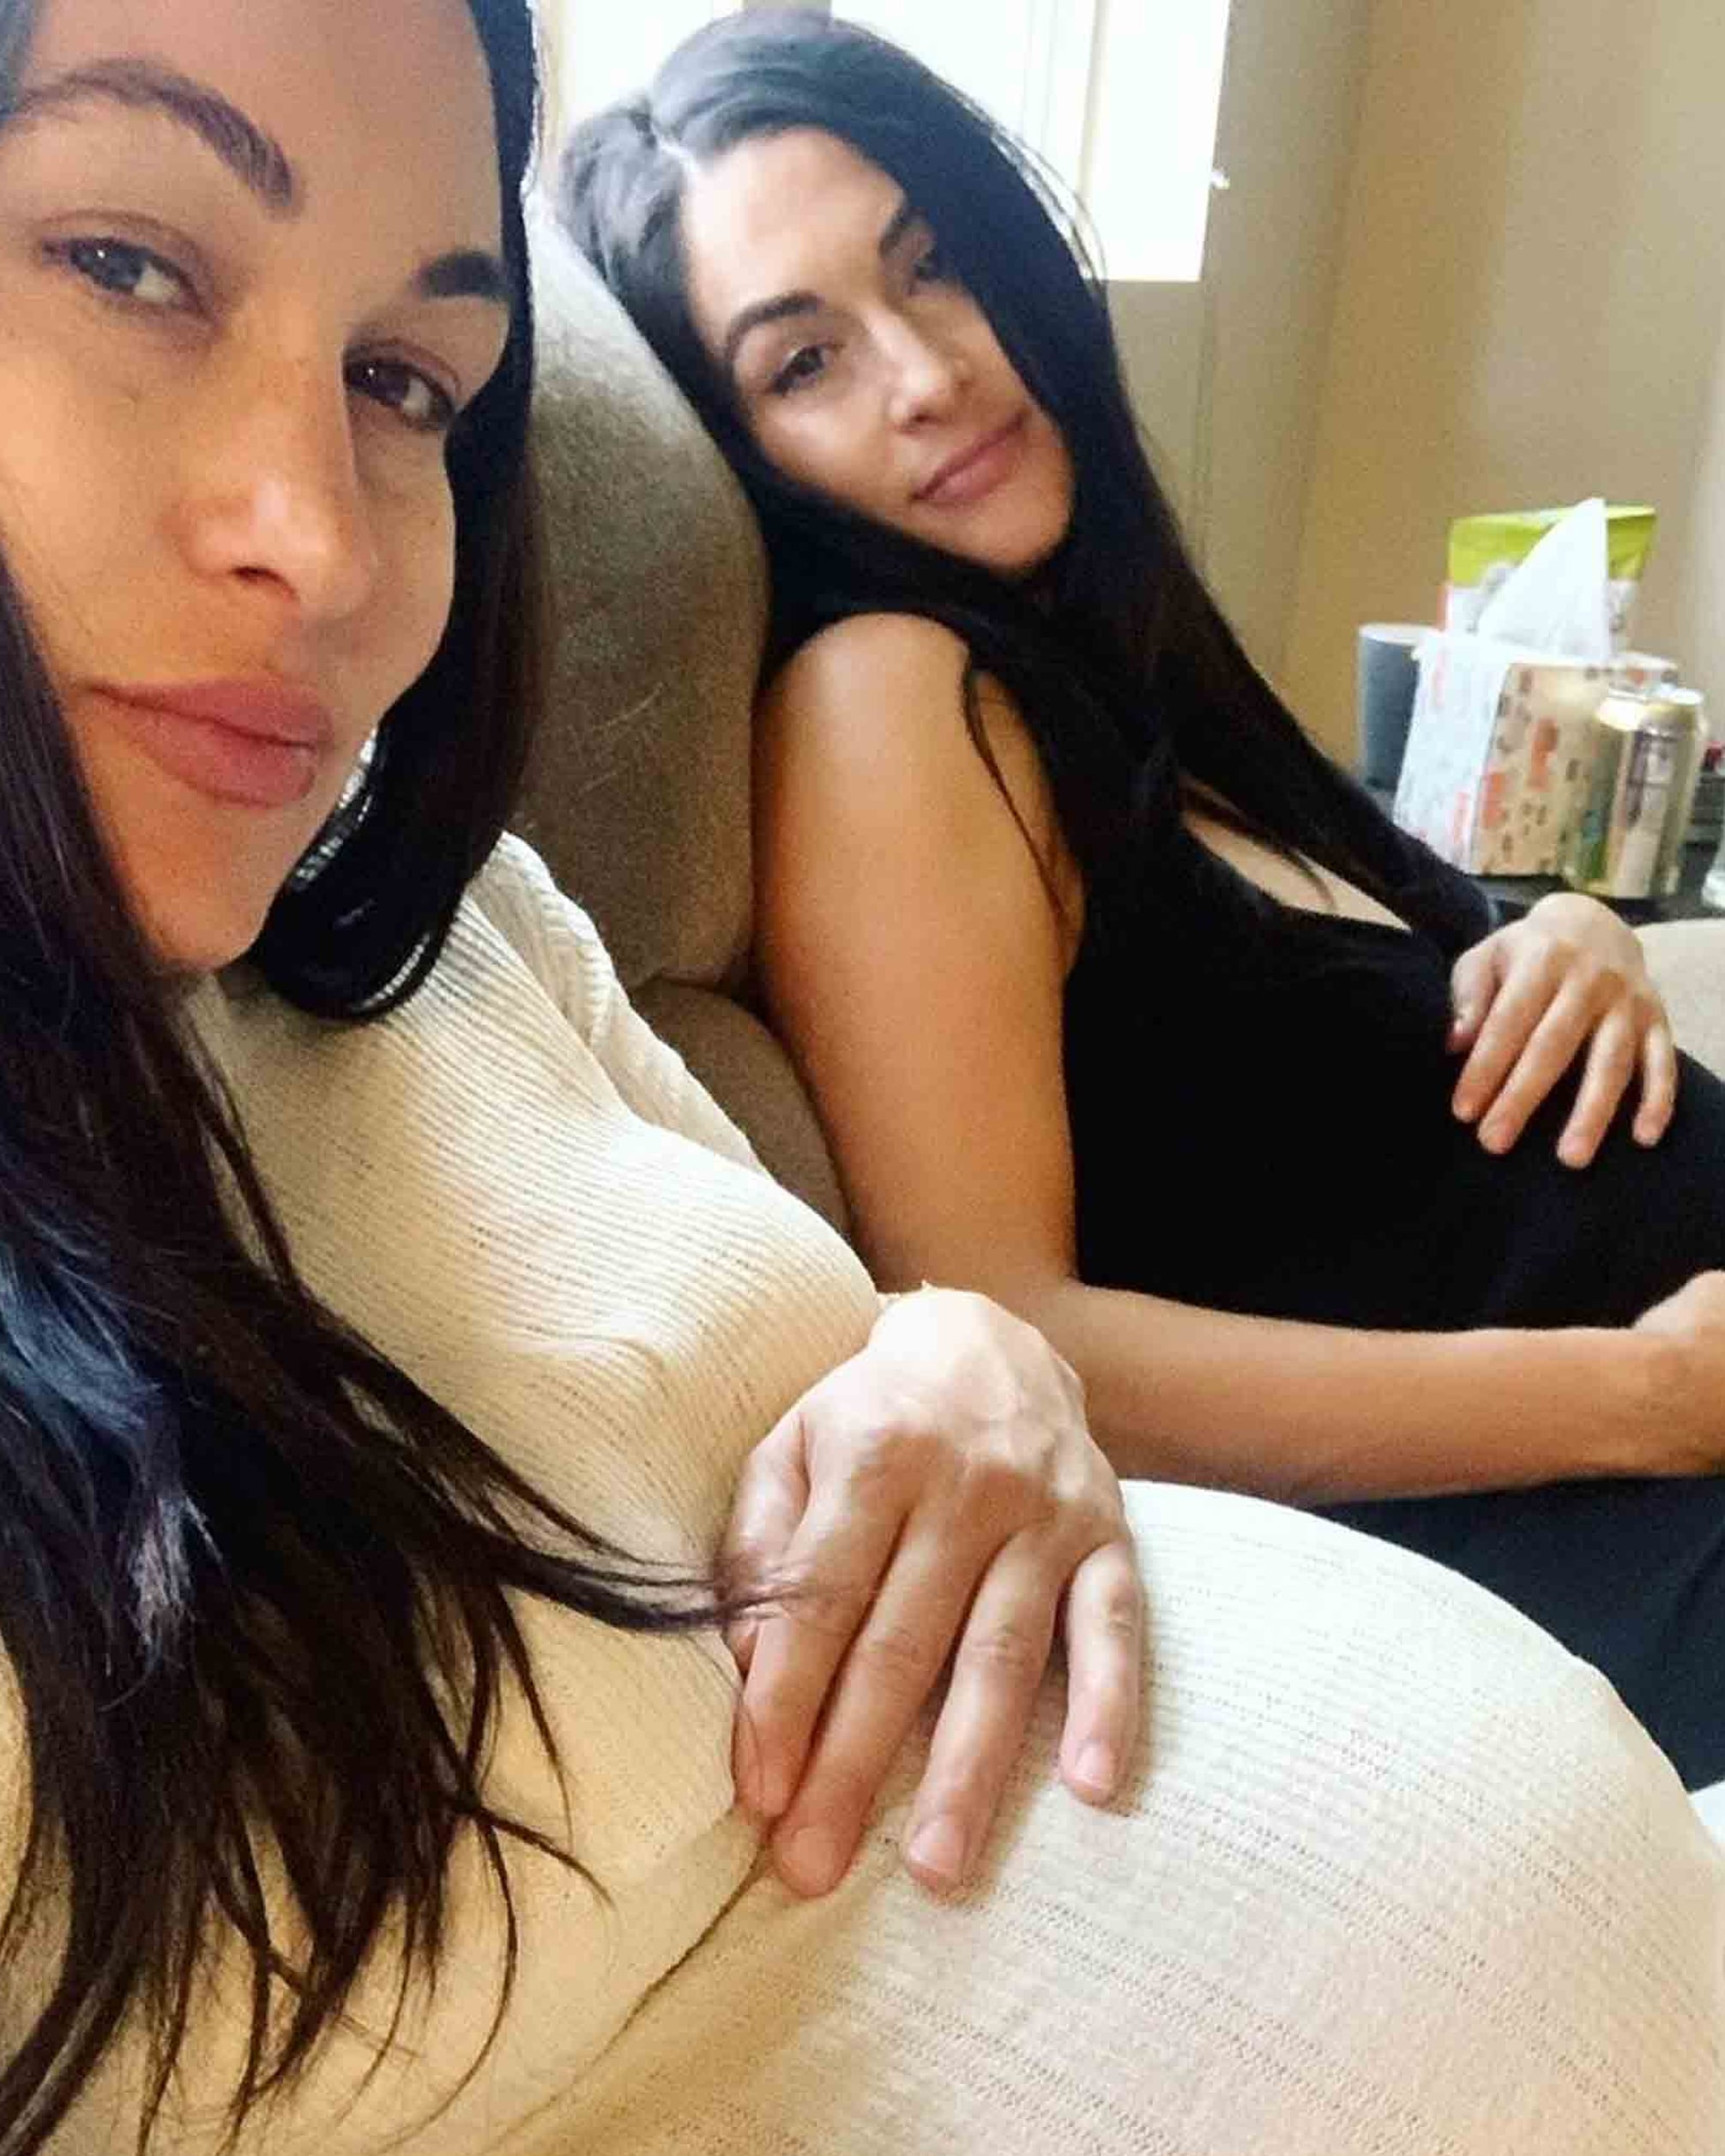 Nikki and Brie Bella introduce their new babies born a day apart